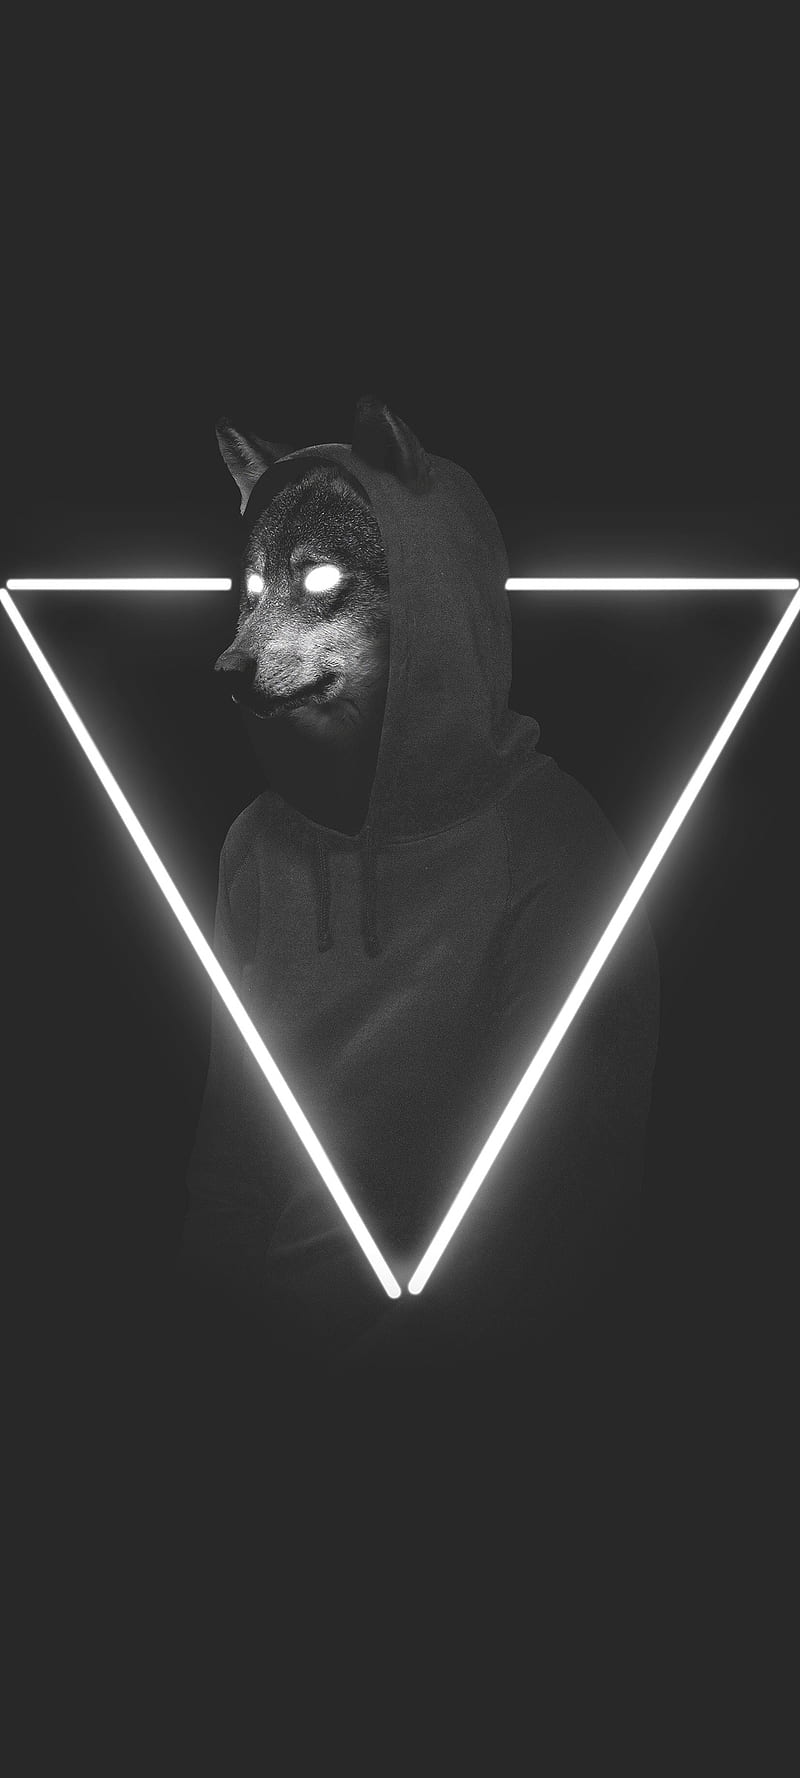 Black, looksgood, thoughts, cool, blackanddark, things, doggy, triangl, HD phone wallpaper